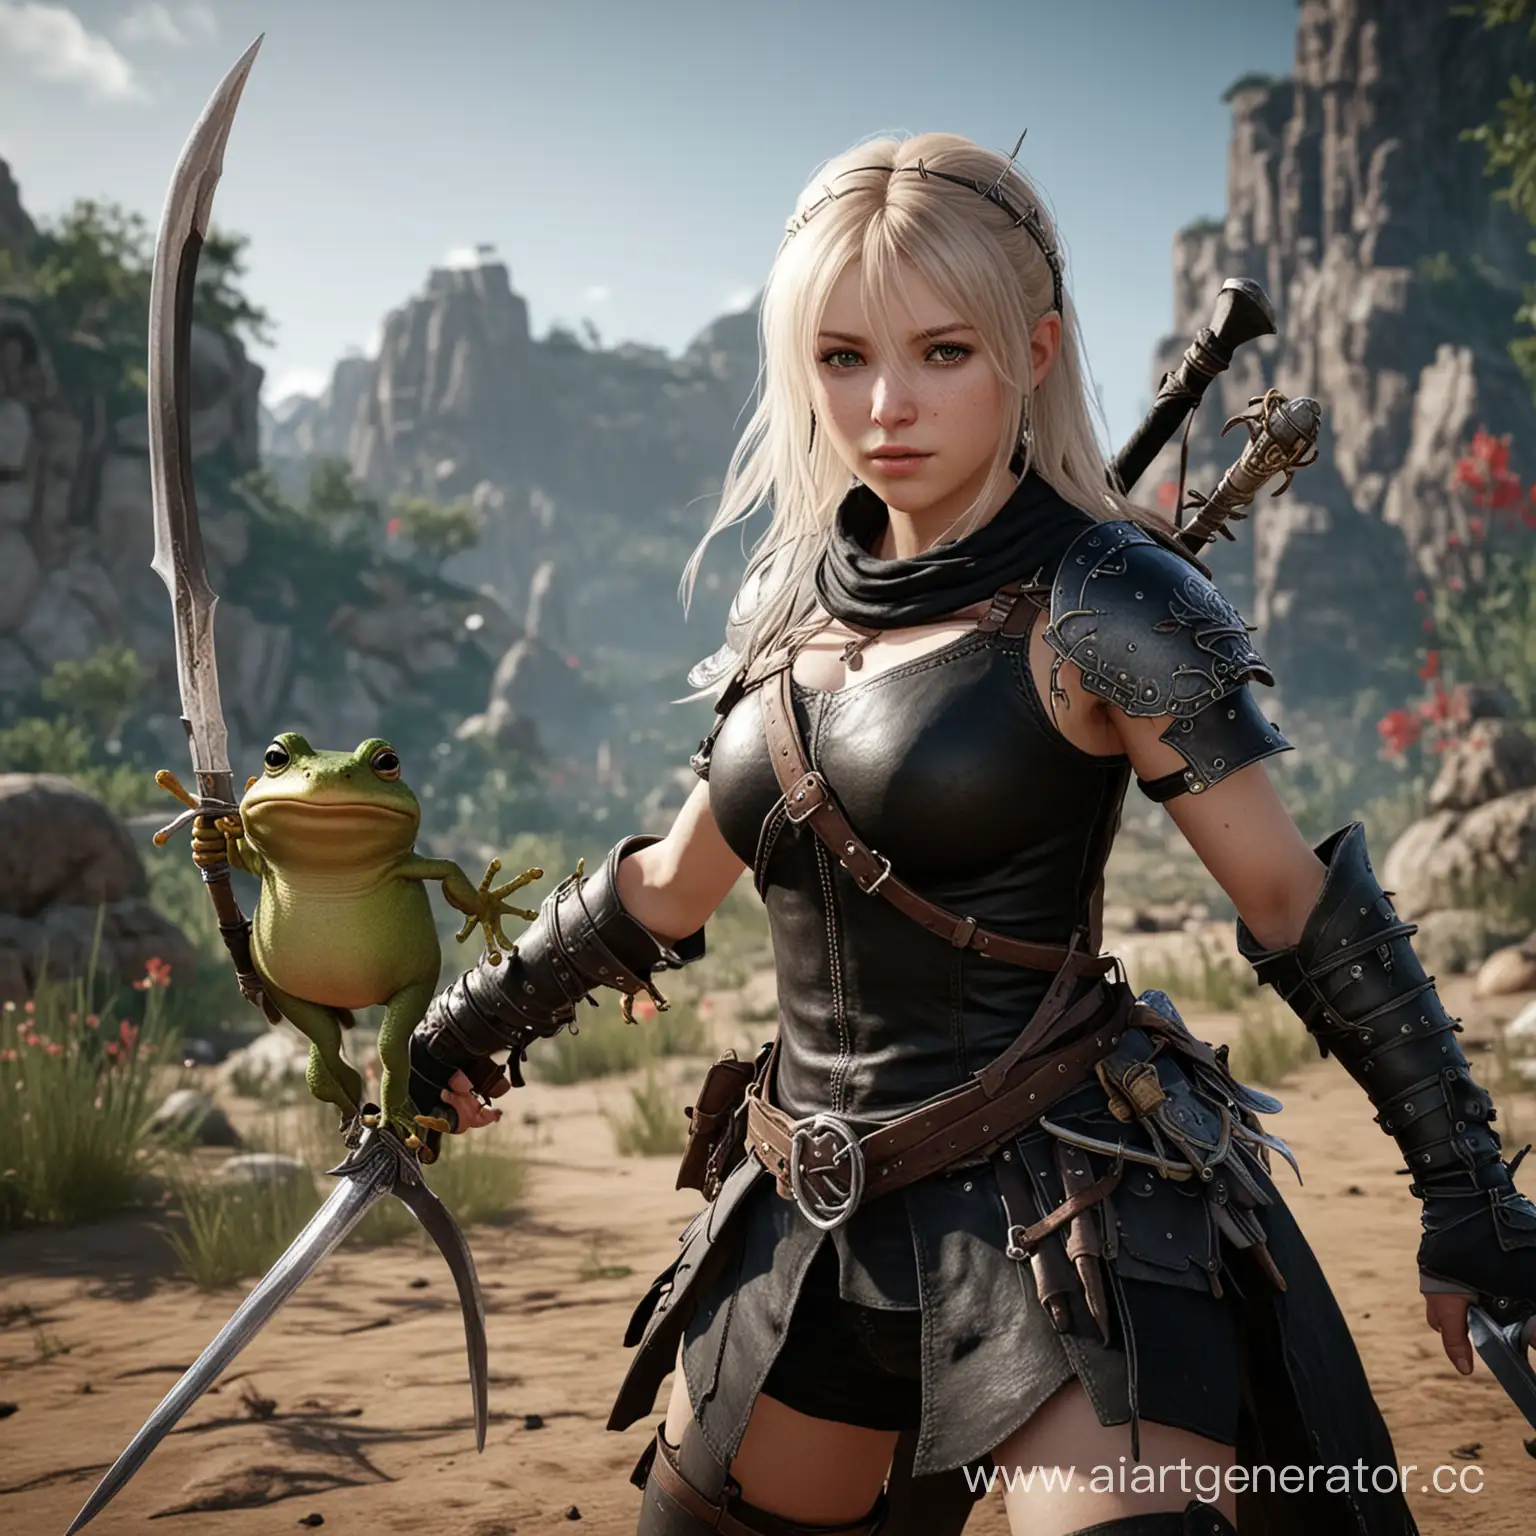 Brutal-Girl-with-Two-Swords-and-a-Frog-Companion-in-Black-Desert-Online